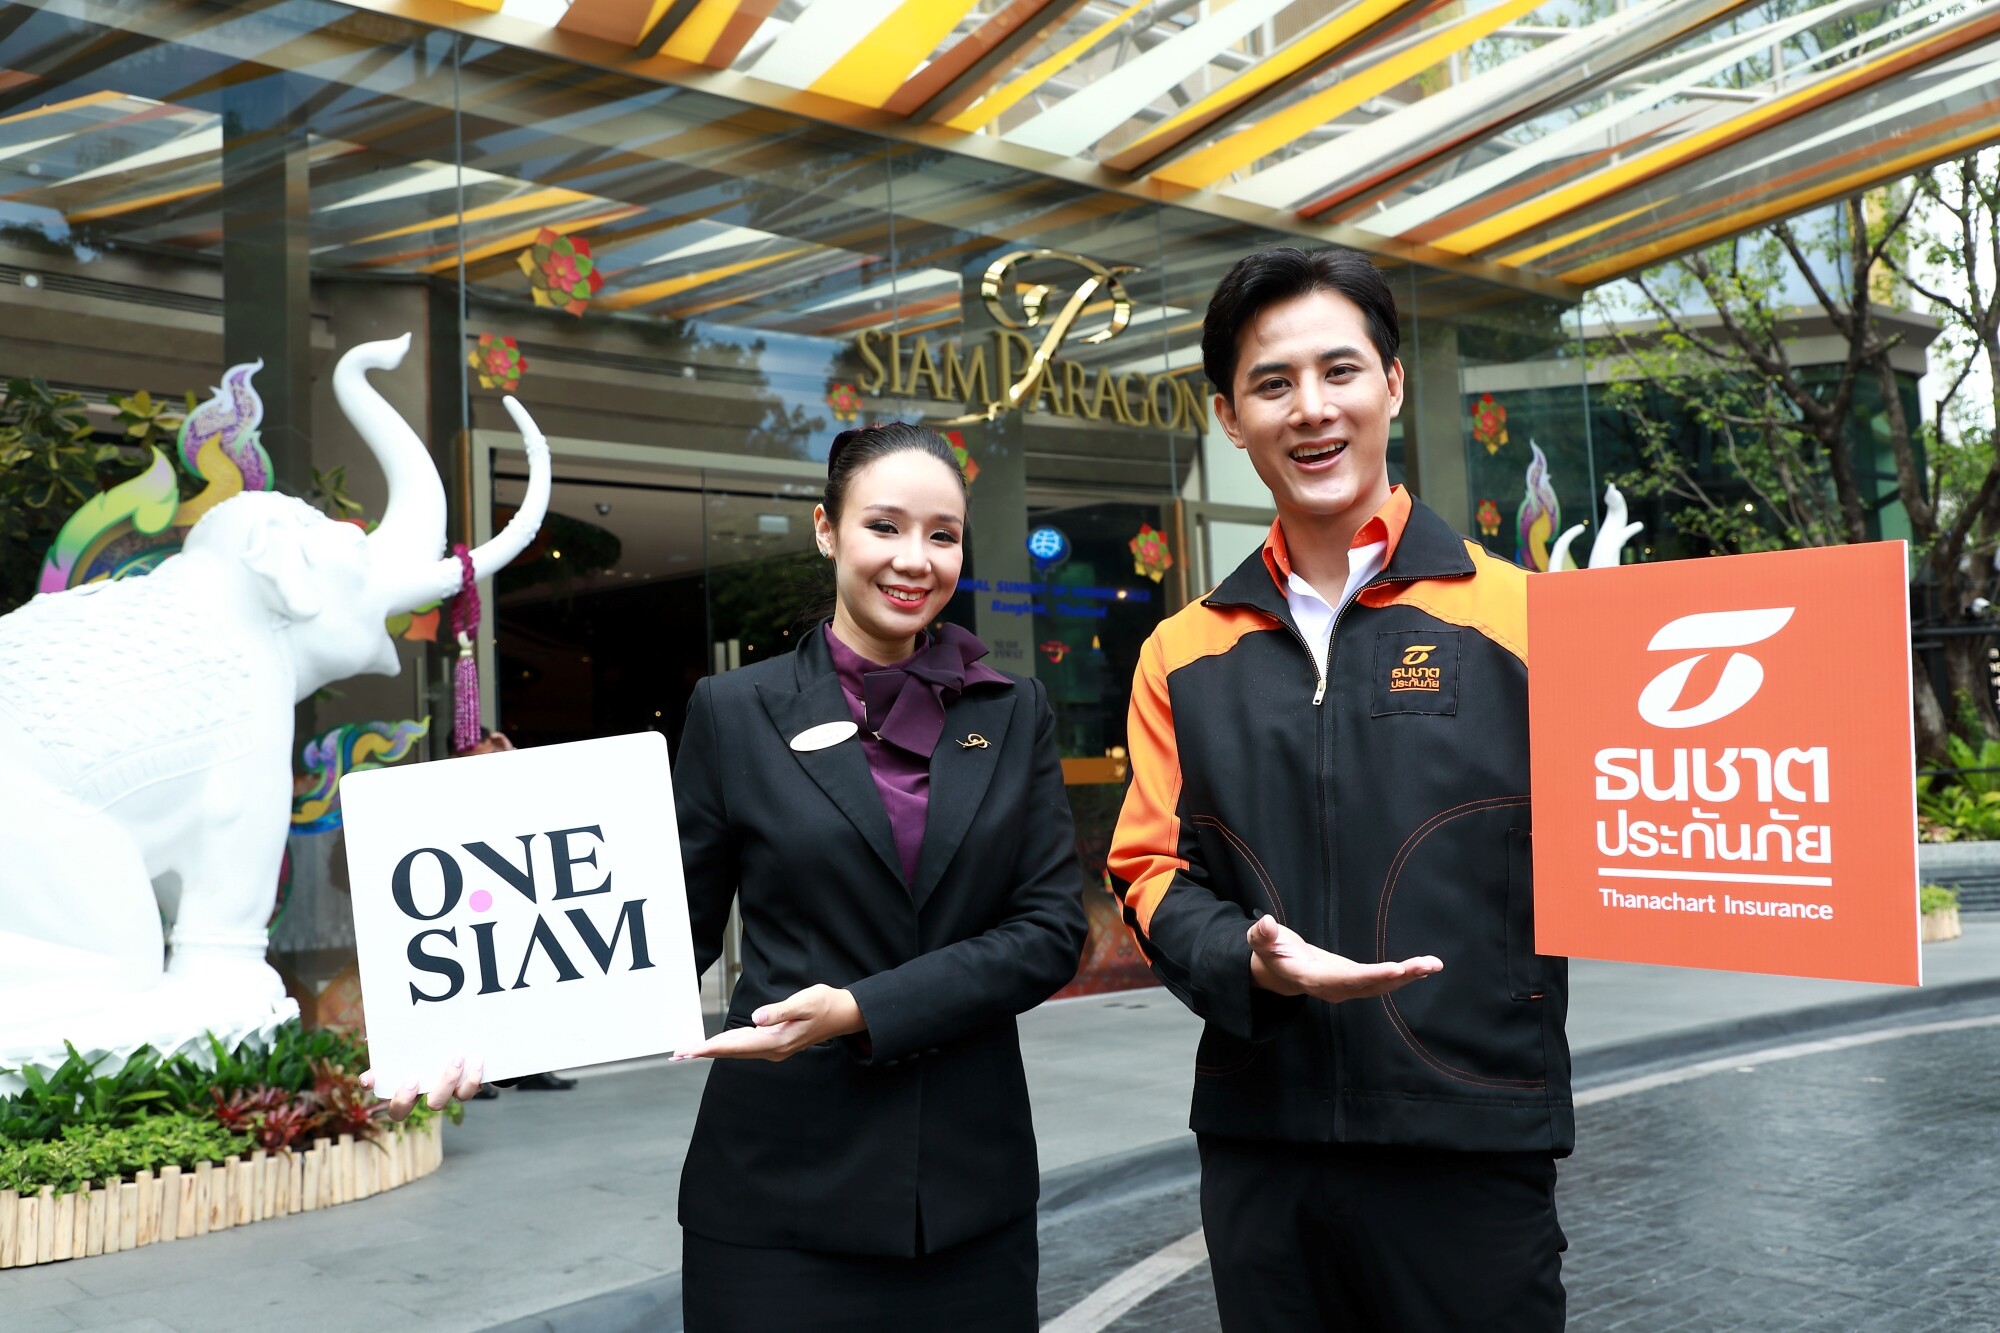 Siam Piwat joins Thanachart Insurance to fulfill luxury lifestyle with protection with exclusive privileges to ONESIAM and ICONSIAM shoppers